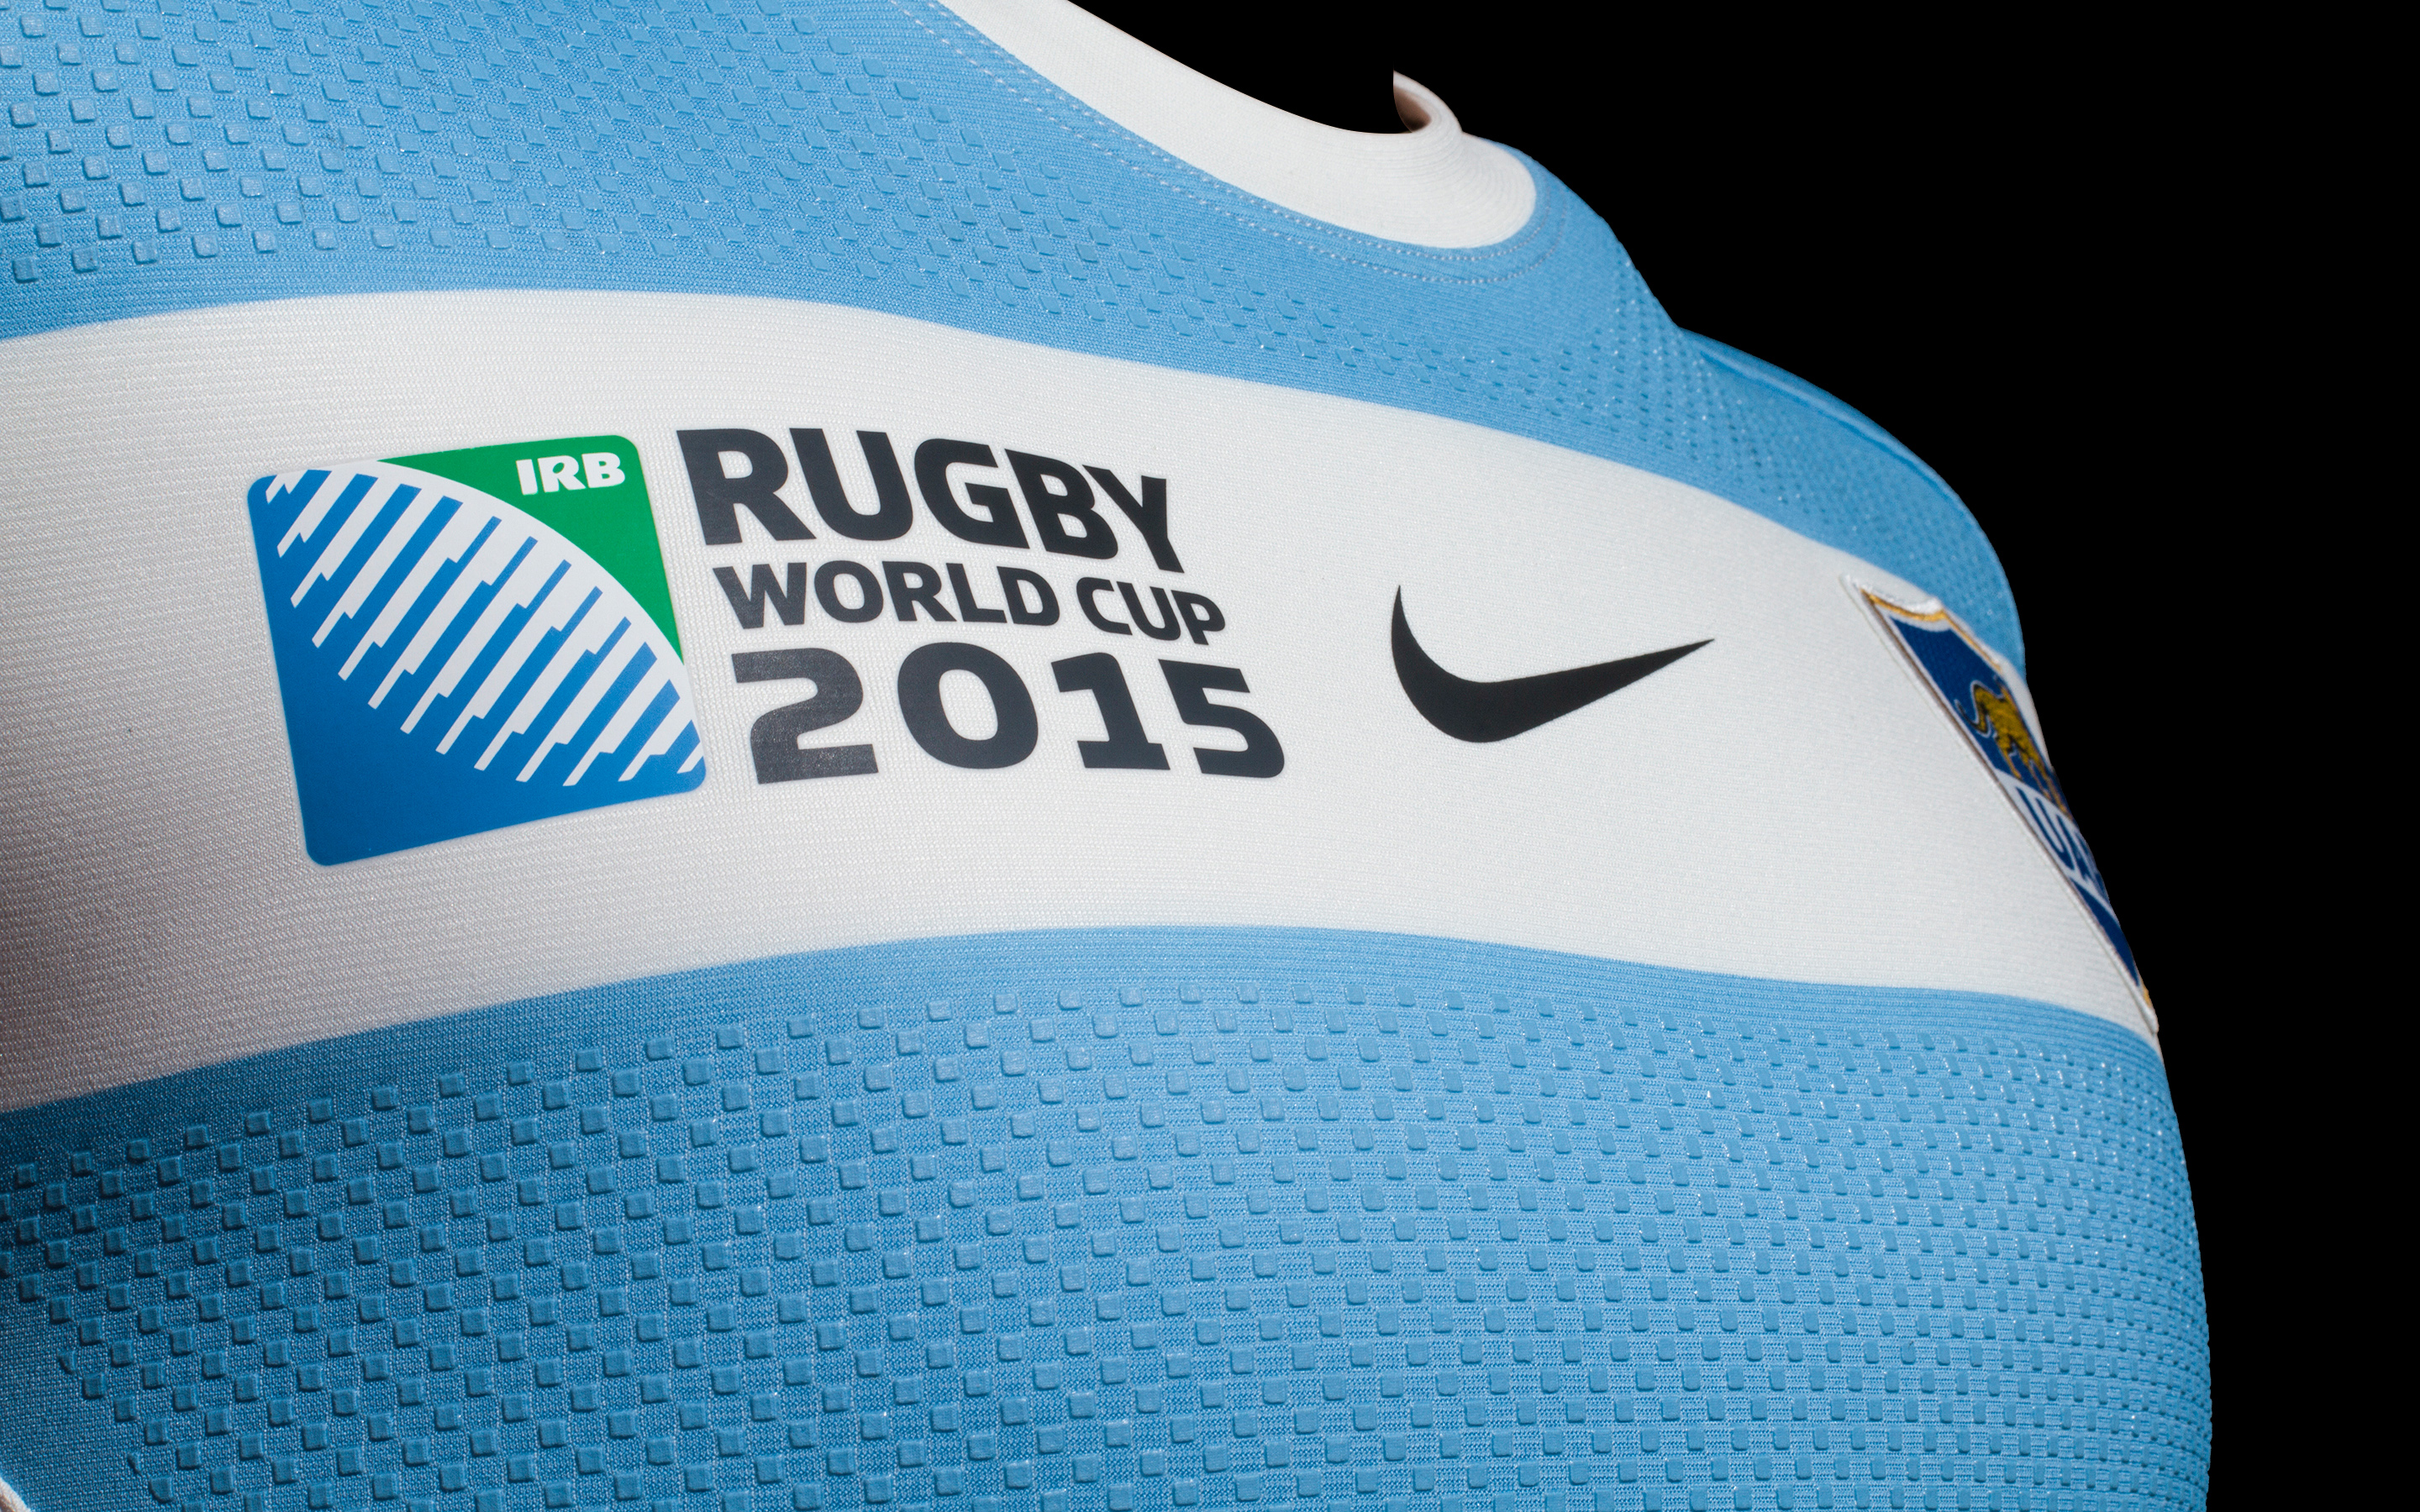 Rugby World Cup 2015 HD Wallpaper